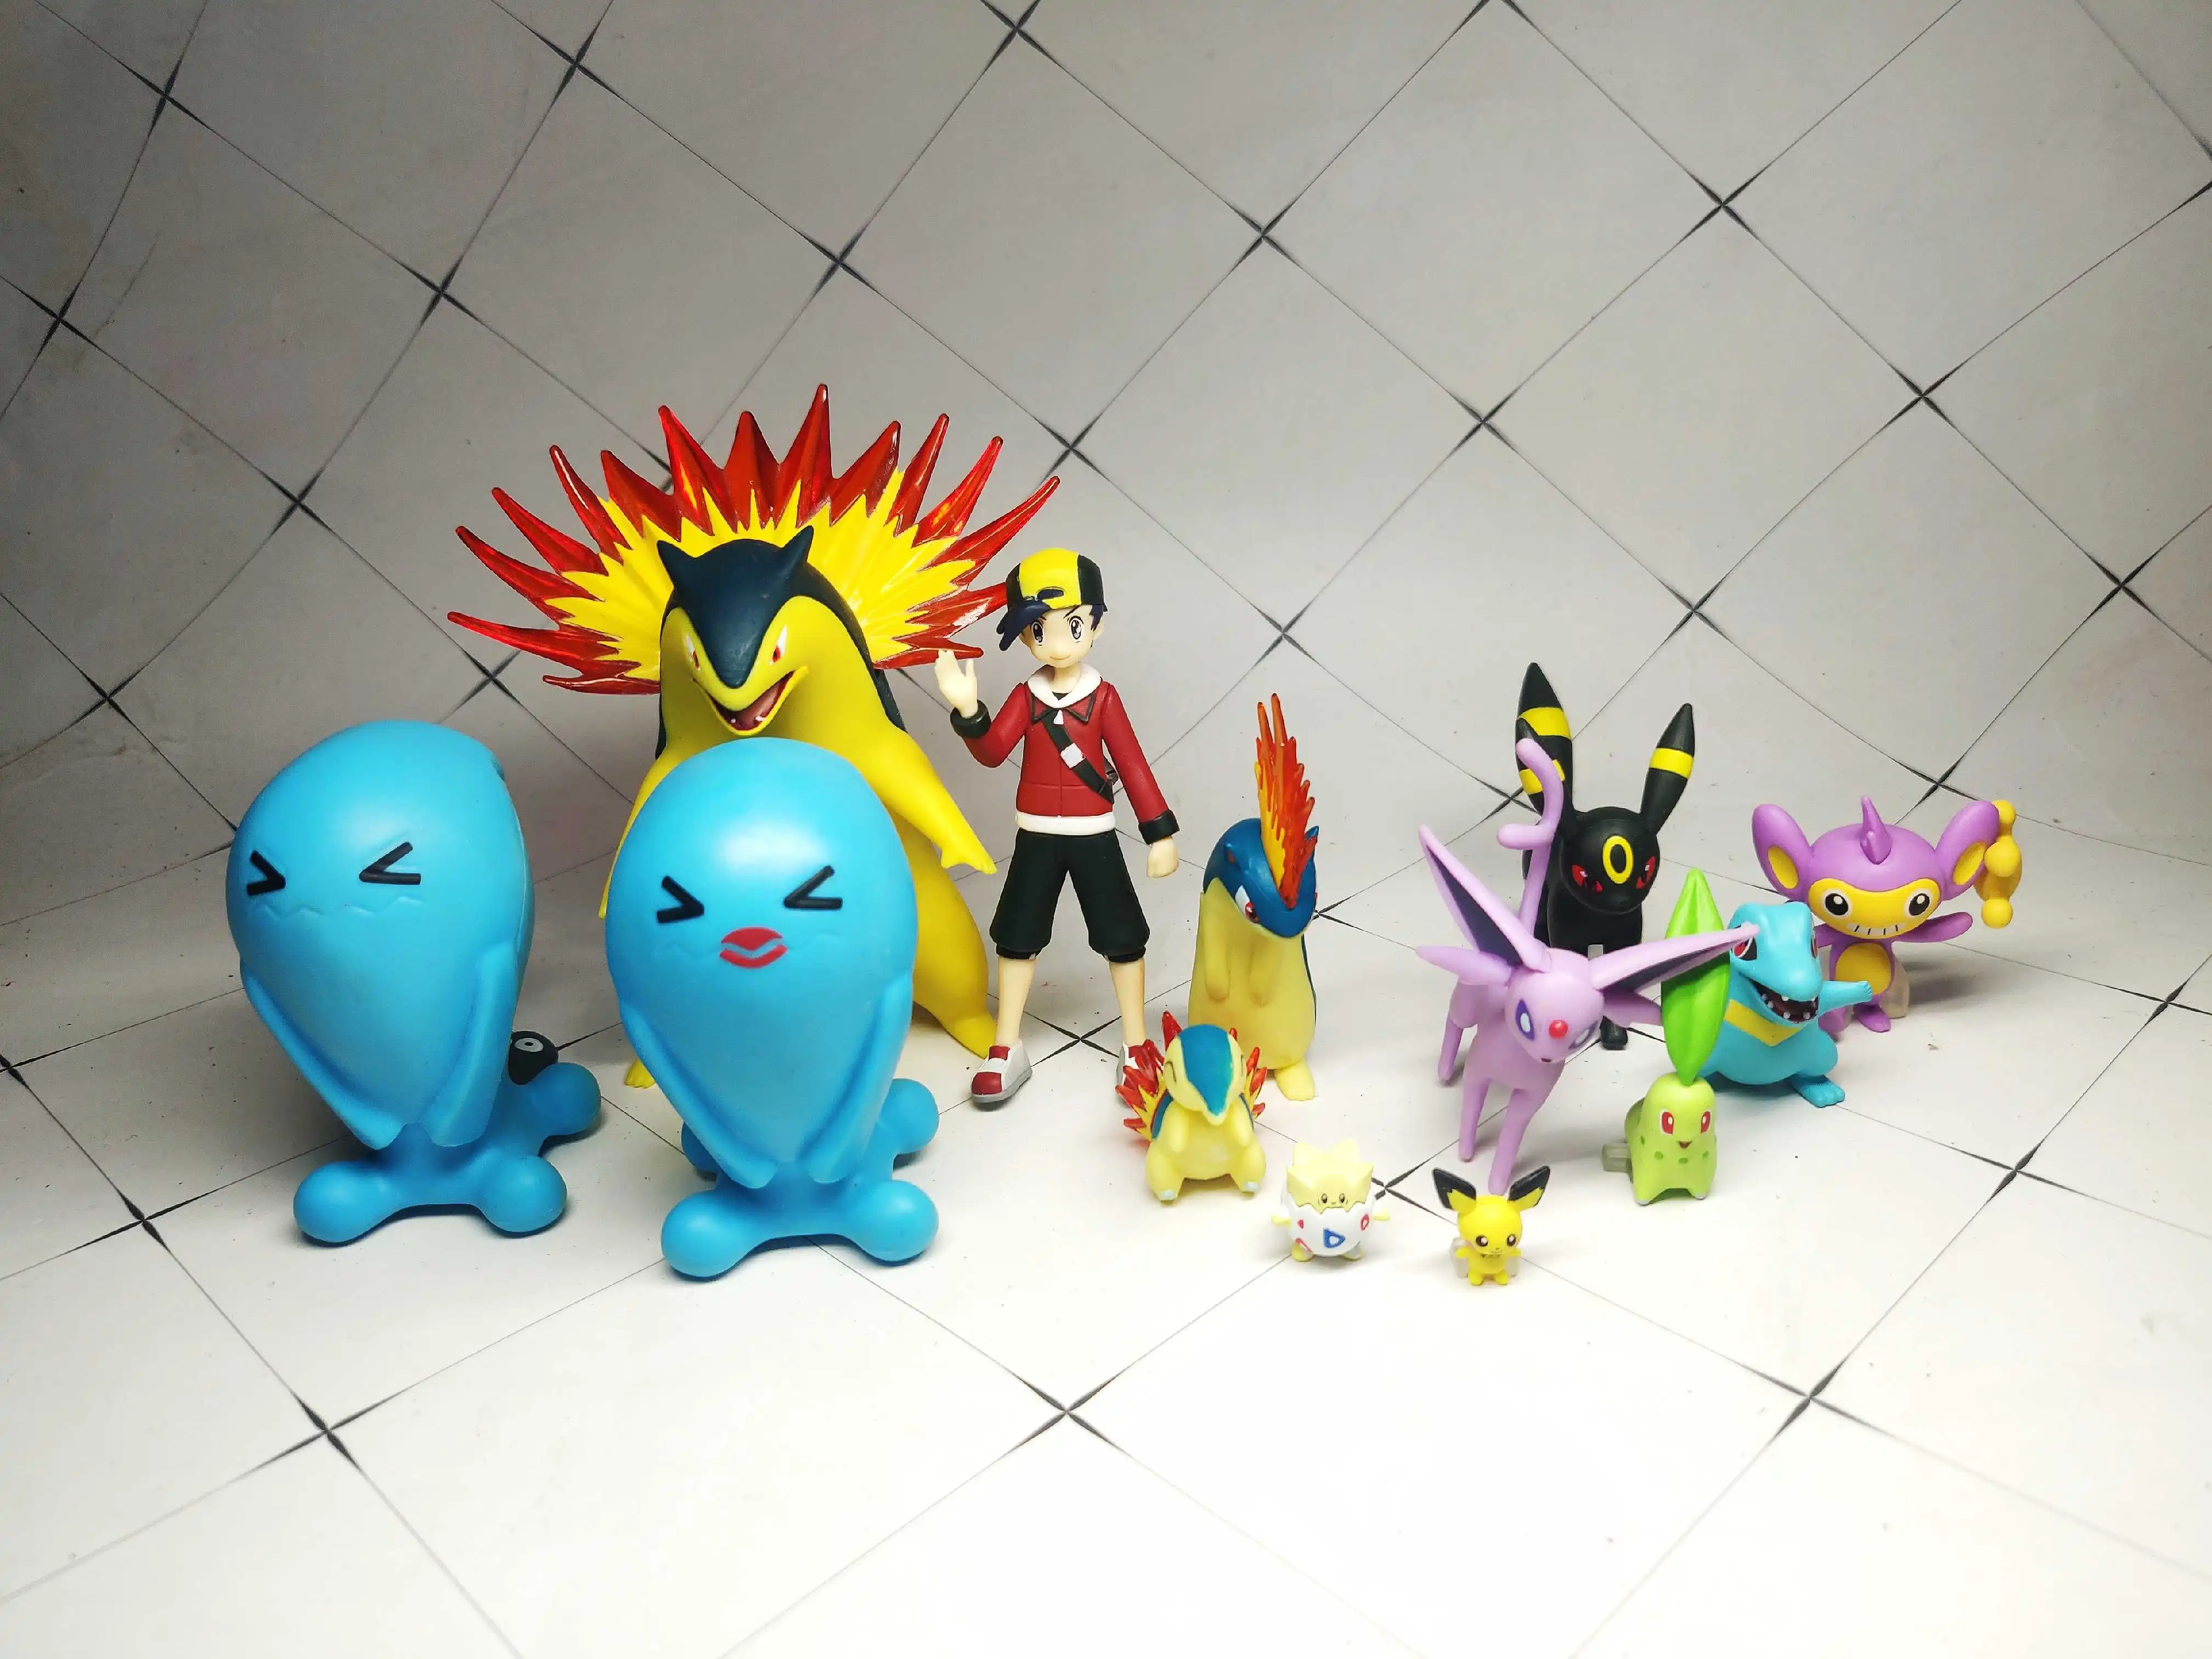 2" Quilava # 156 Pokemon Toys Action Figures Figurines 2nd Series Generation 2 